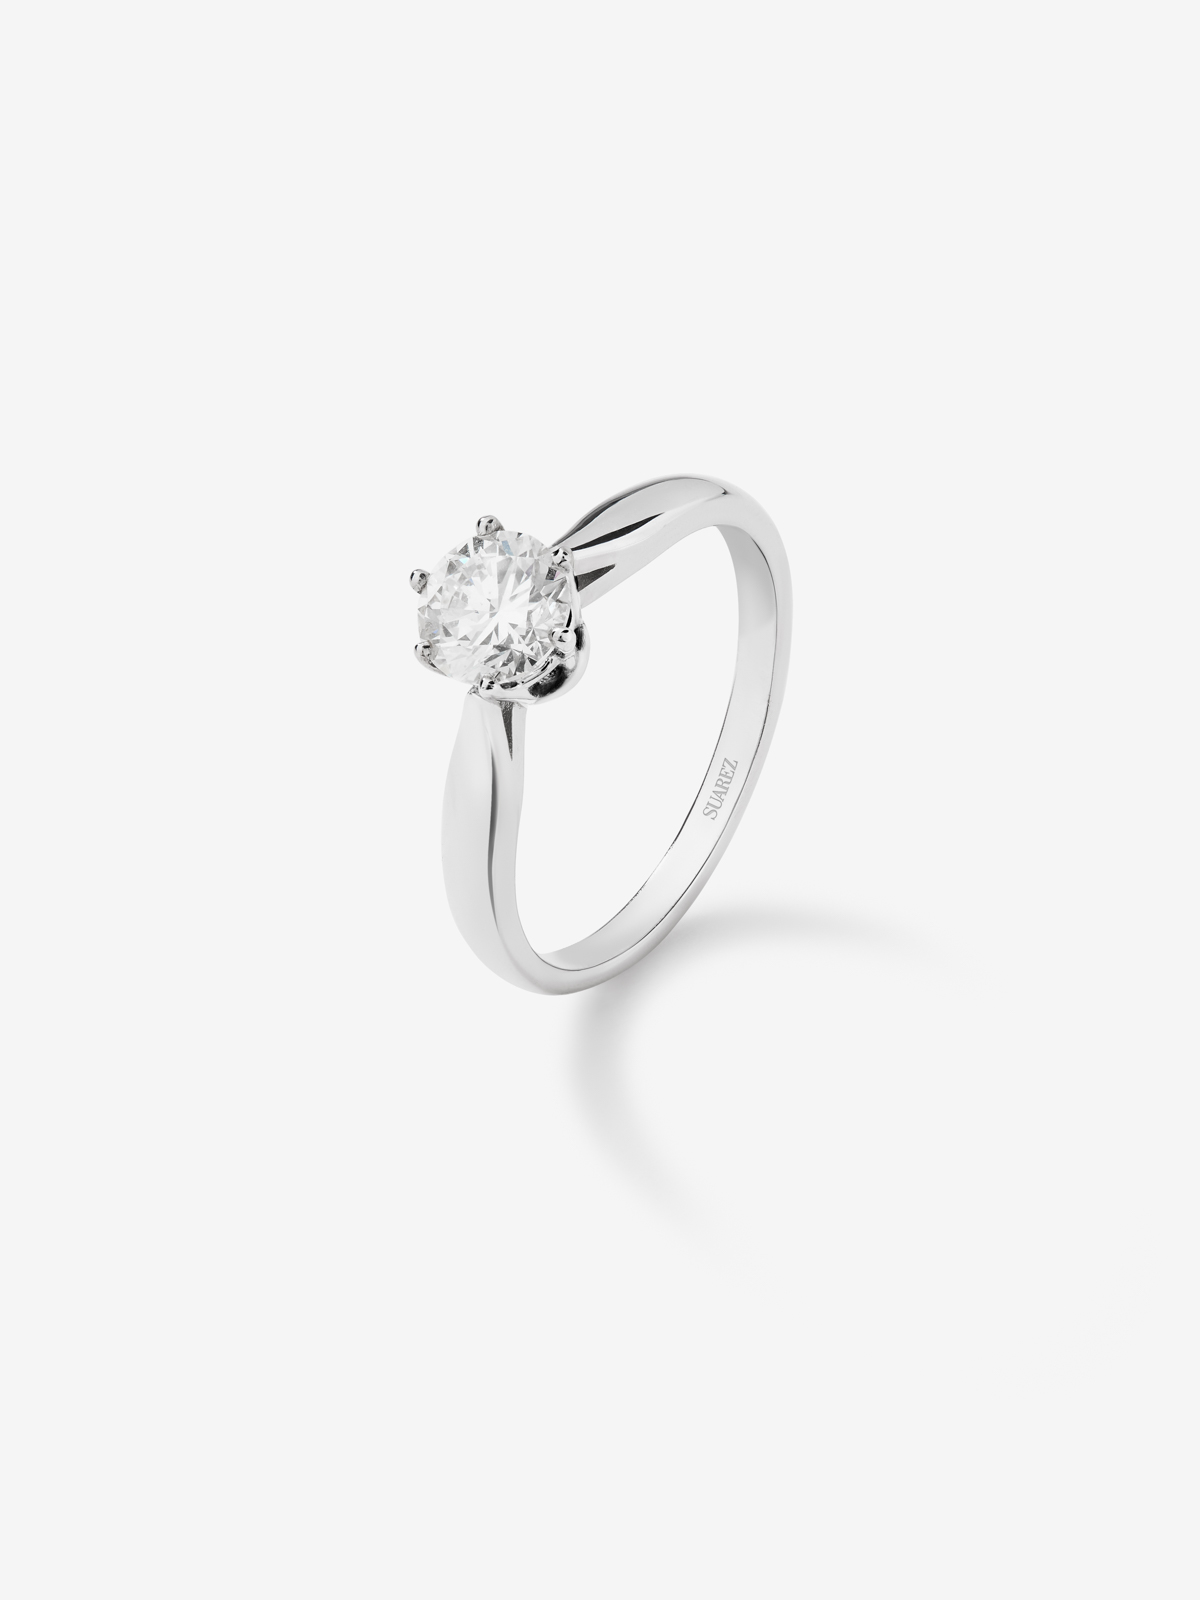 18K White Gold Commitment Ring with 0.7 carat central diamond